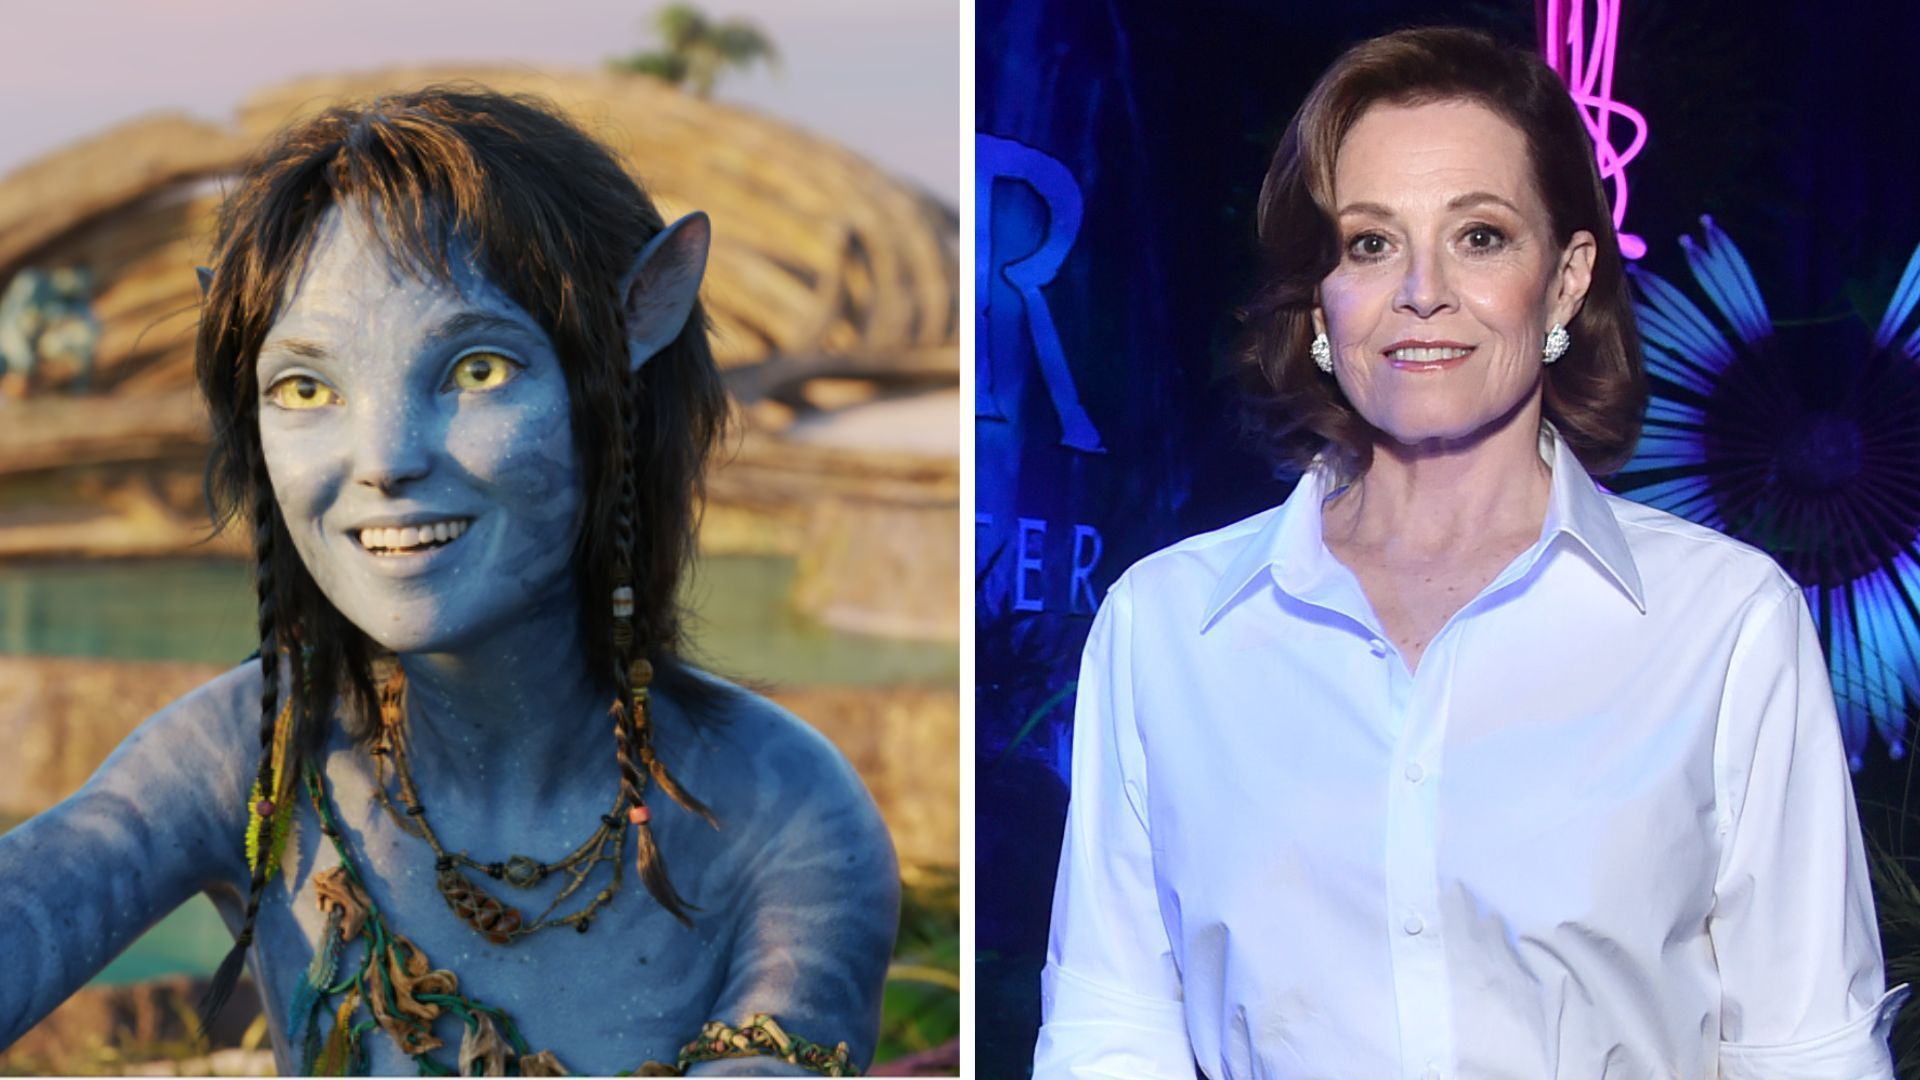 Avatar 2' Cast: What 'The Way of Water' Cast Really Looks Like